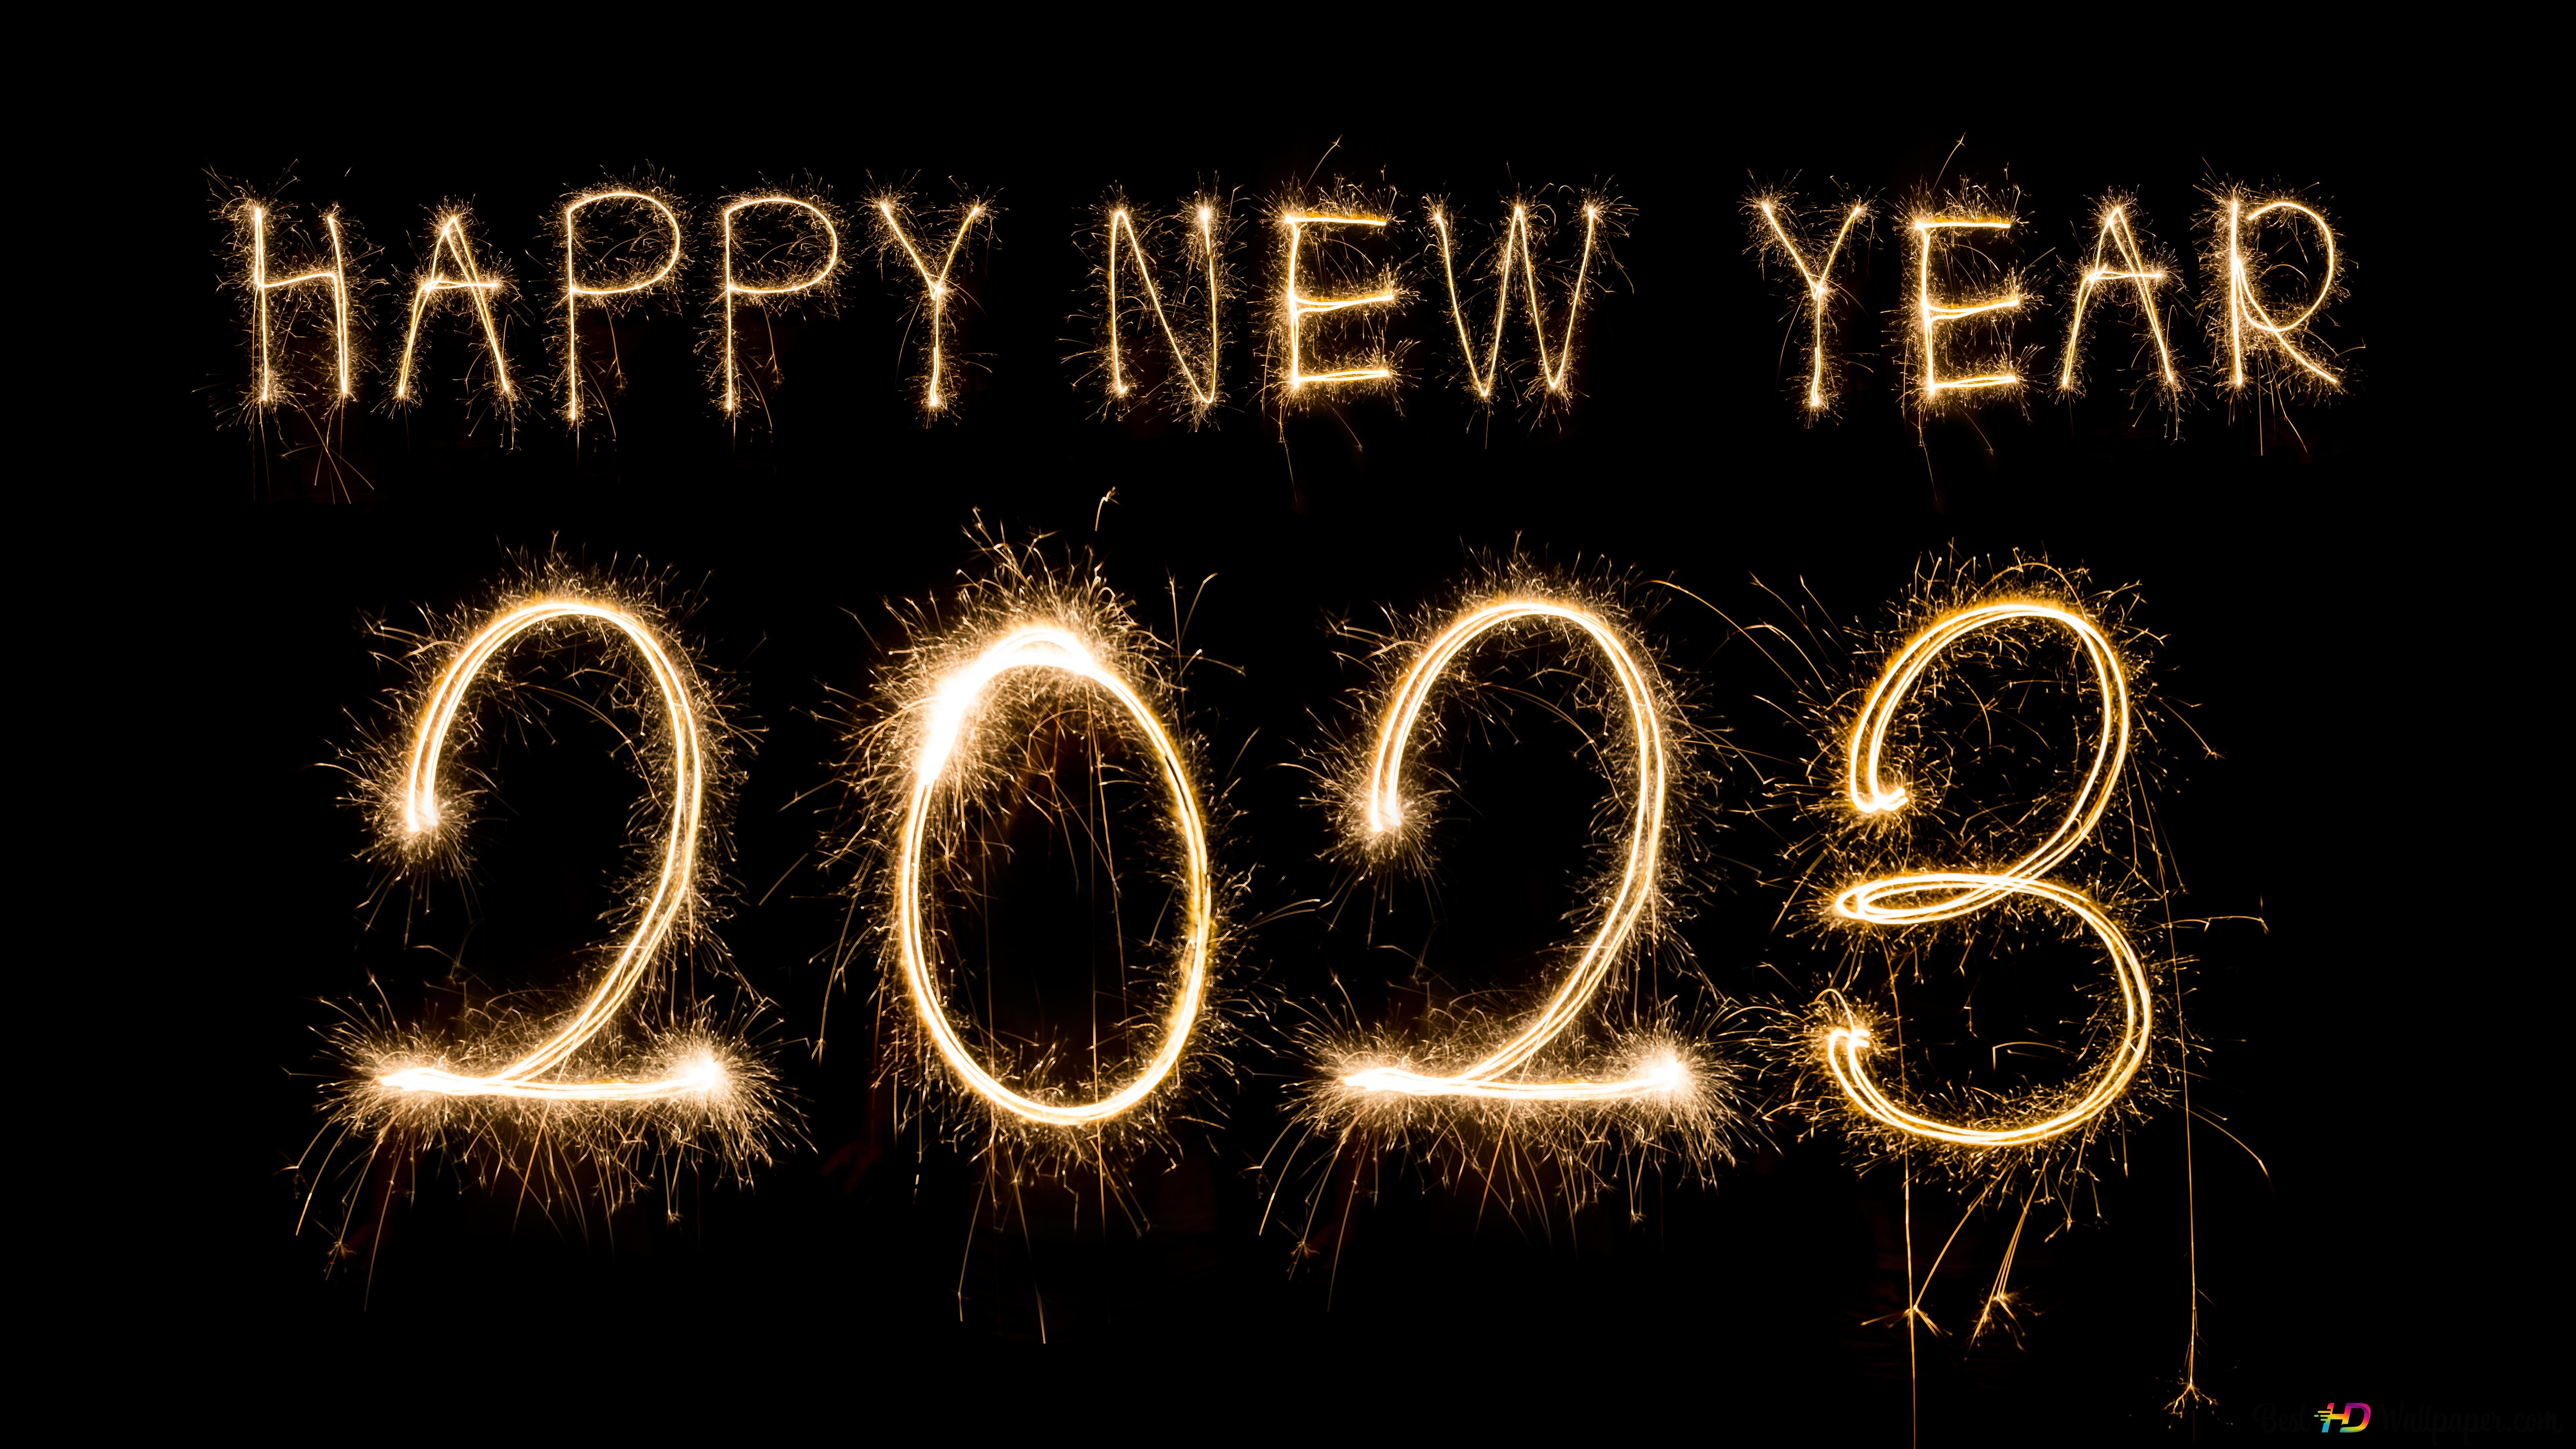 Happy new year 2023 written from fireworks black background 8K wallpaper download